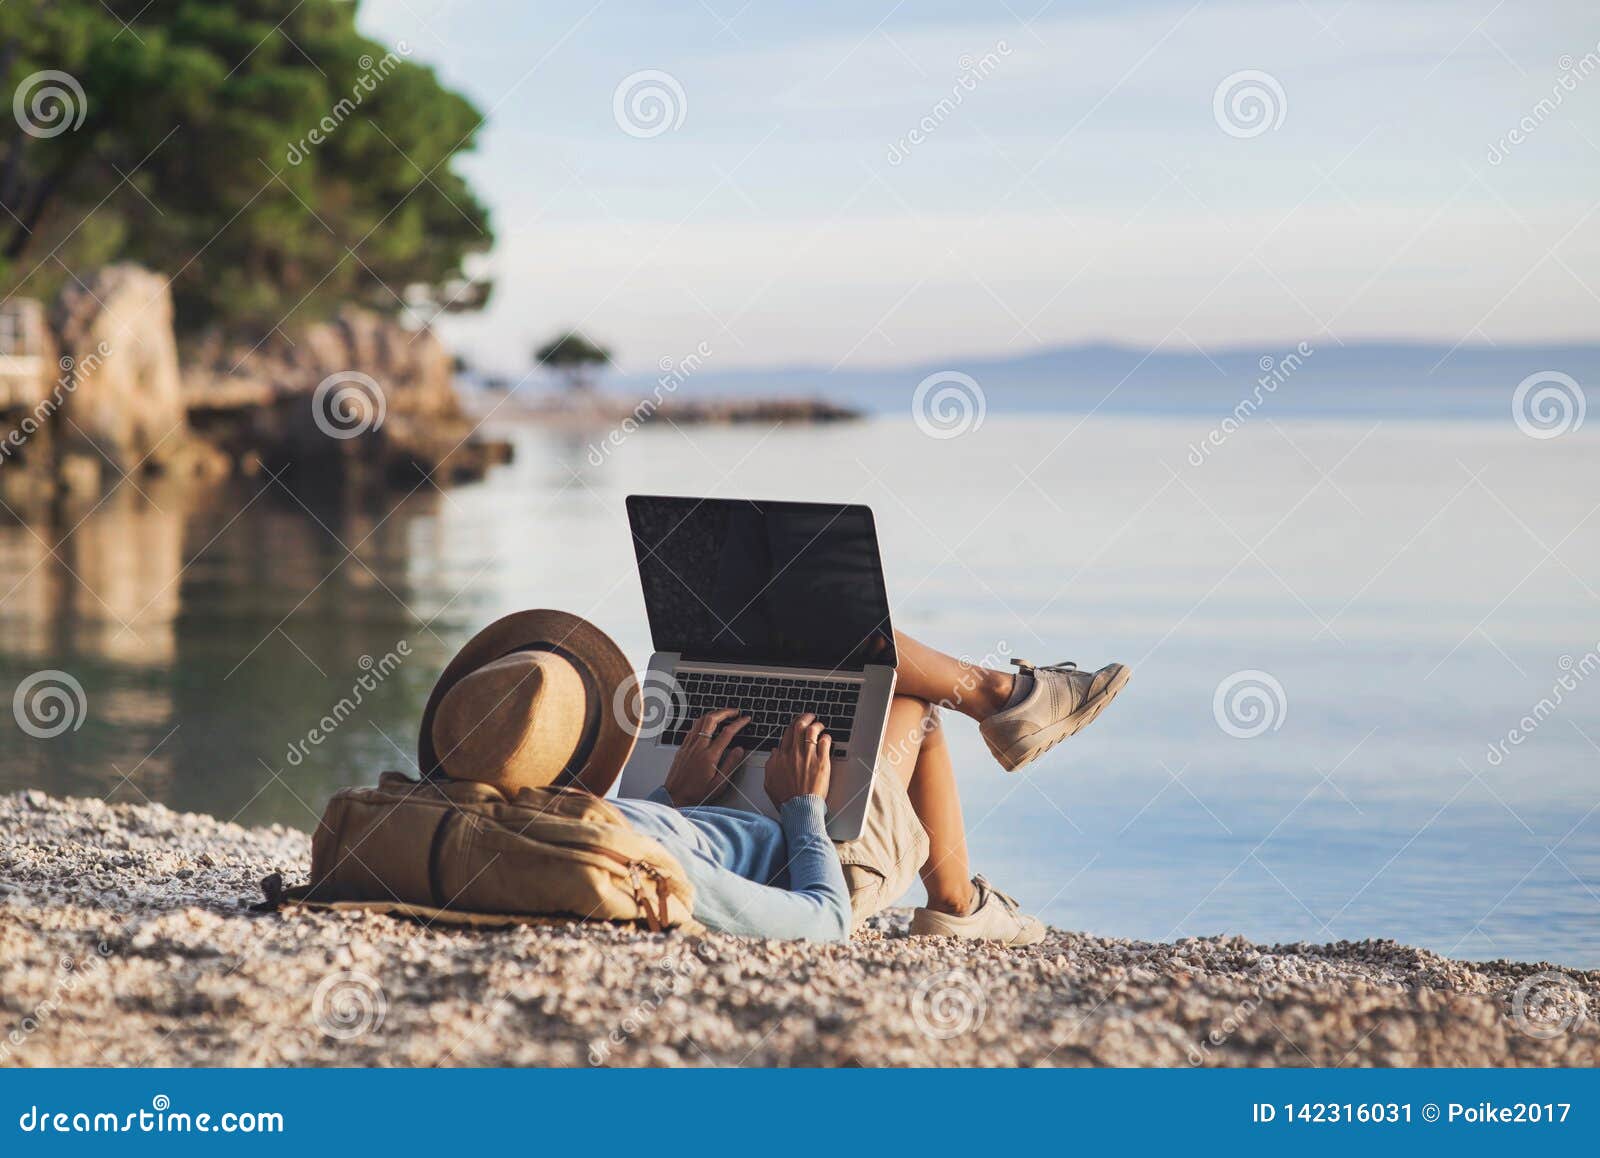 young woman using laptop computer on a beach. freelance work concept